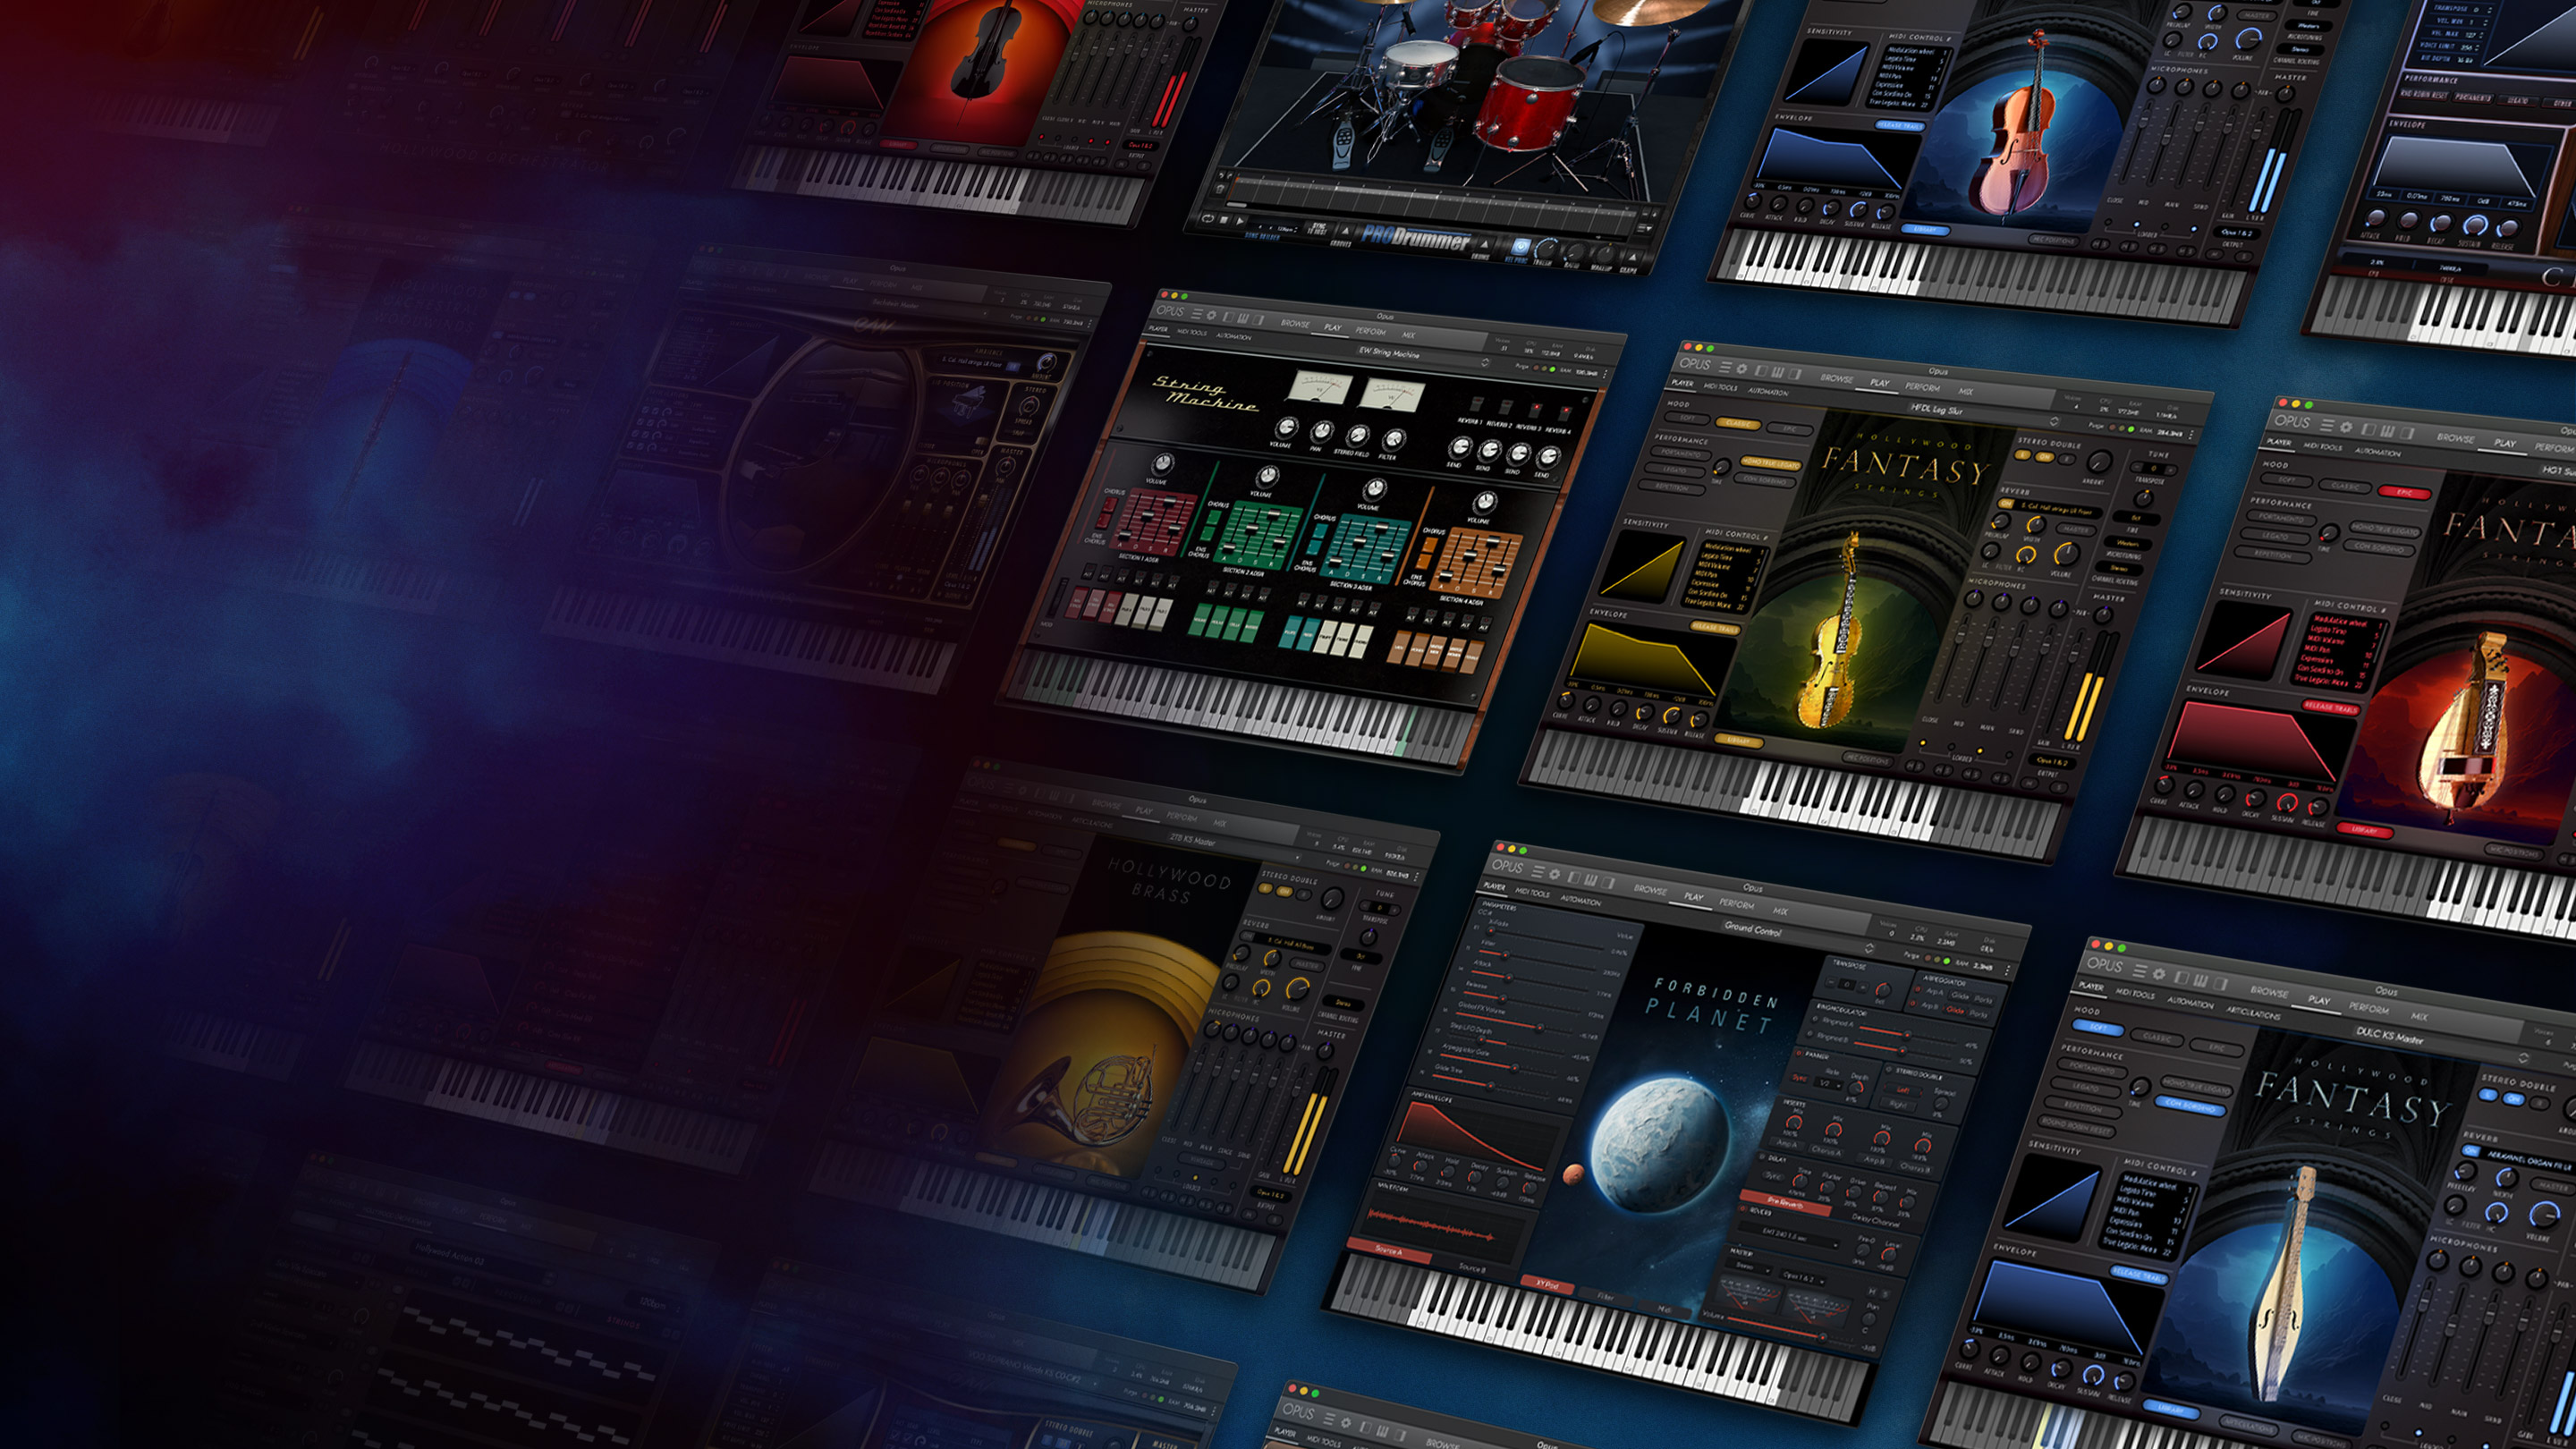 EastWest ComposerCloud+ - All of EastWest's 42,000+ Award-Winning Virtual Instruments for only $19.99 per month